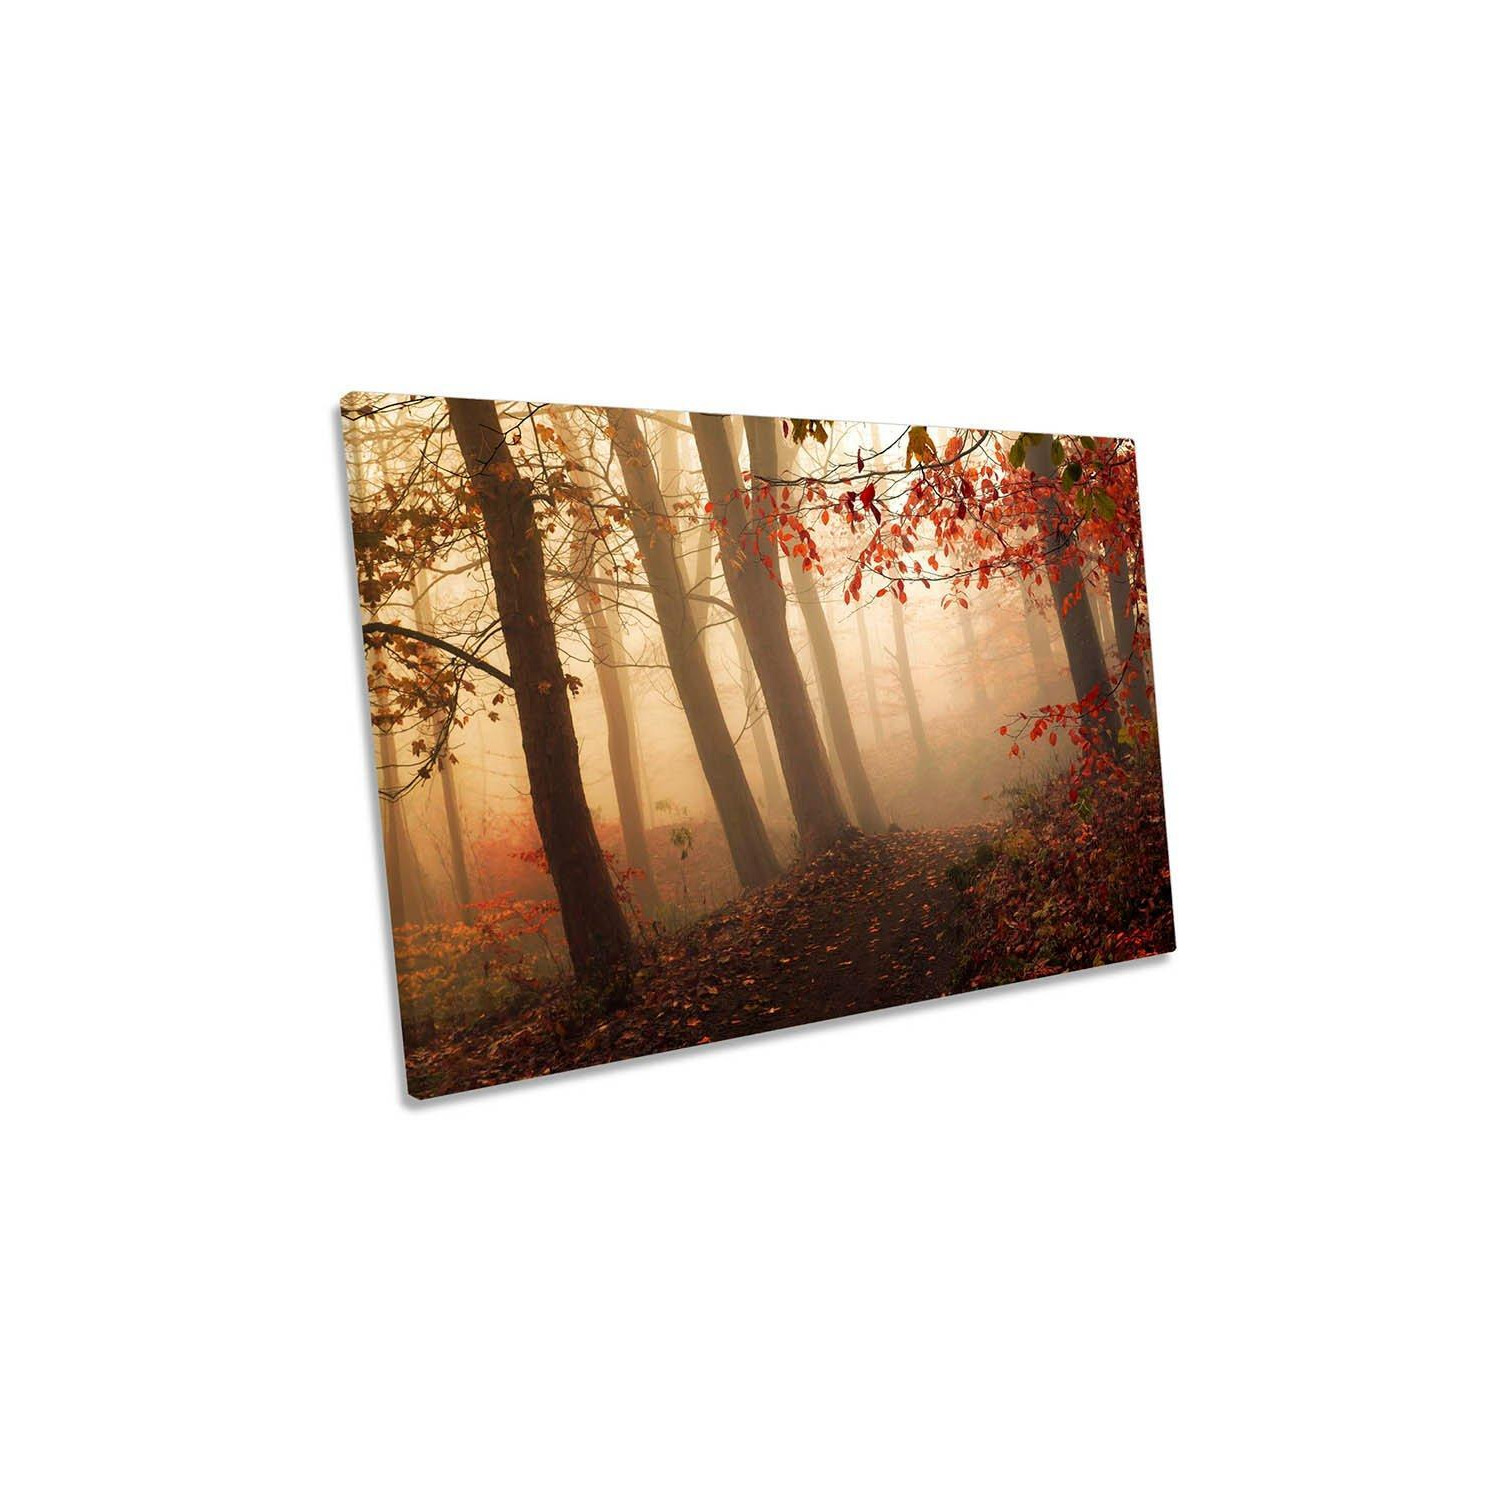 Towards the Light Red Forest Canvas Wall Art Picture Print - image 1